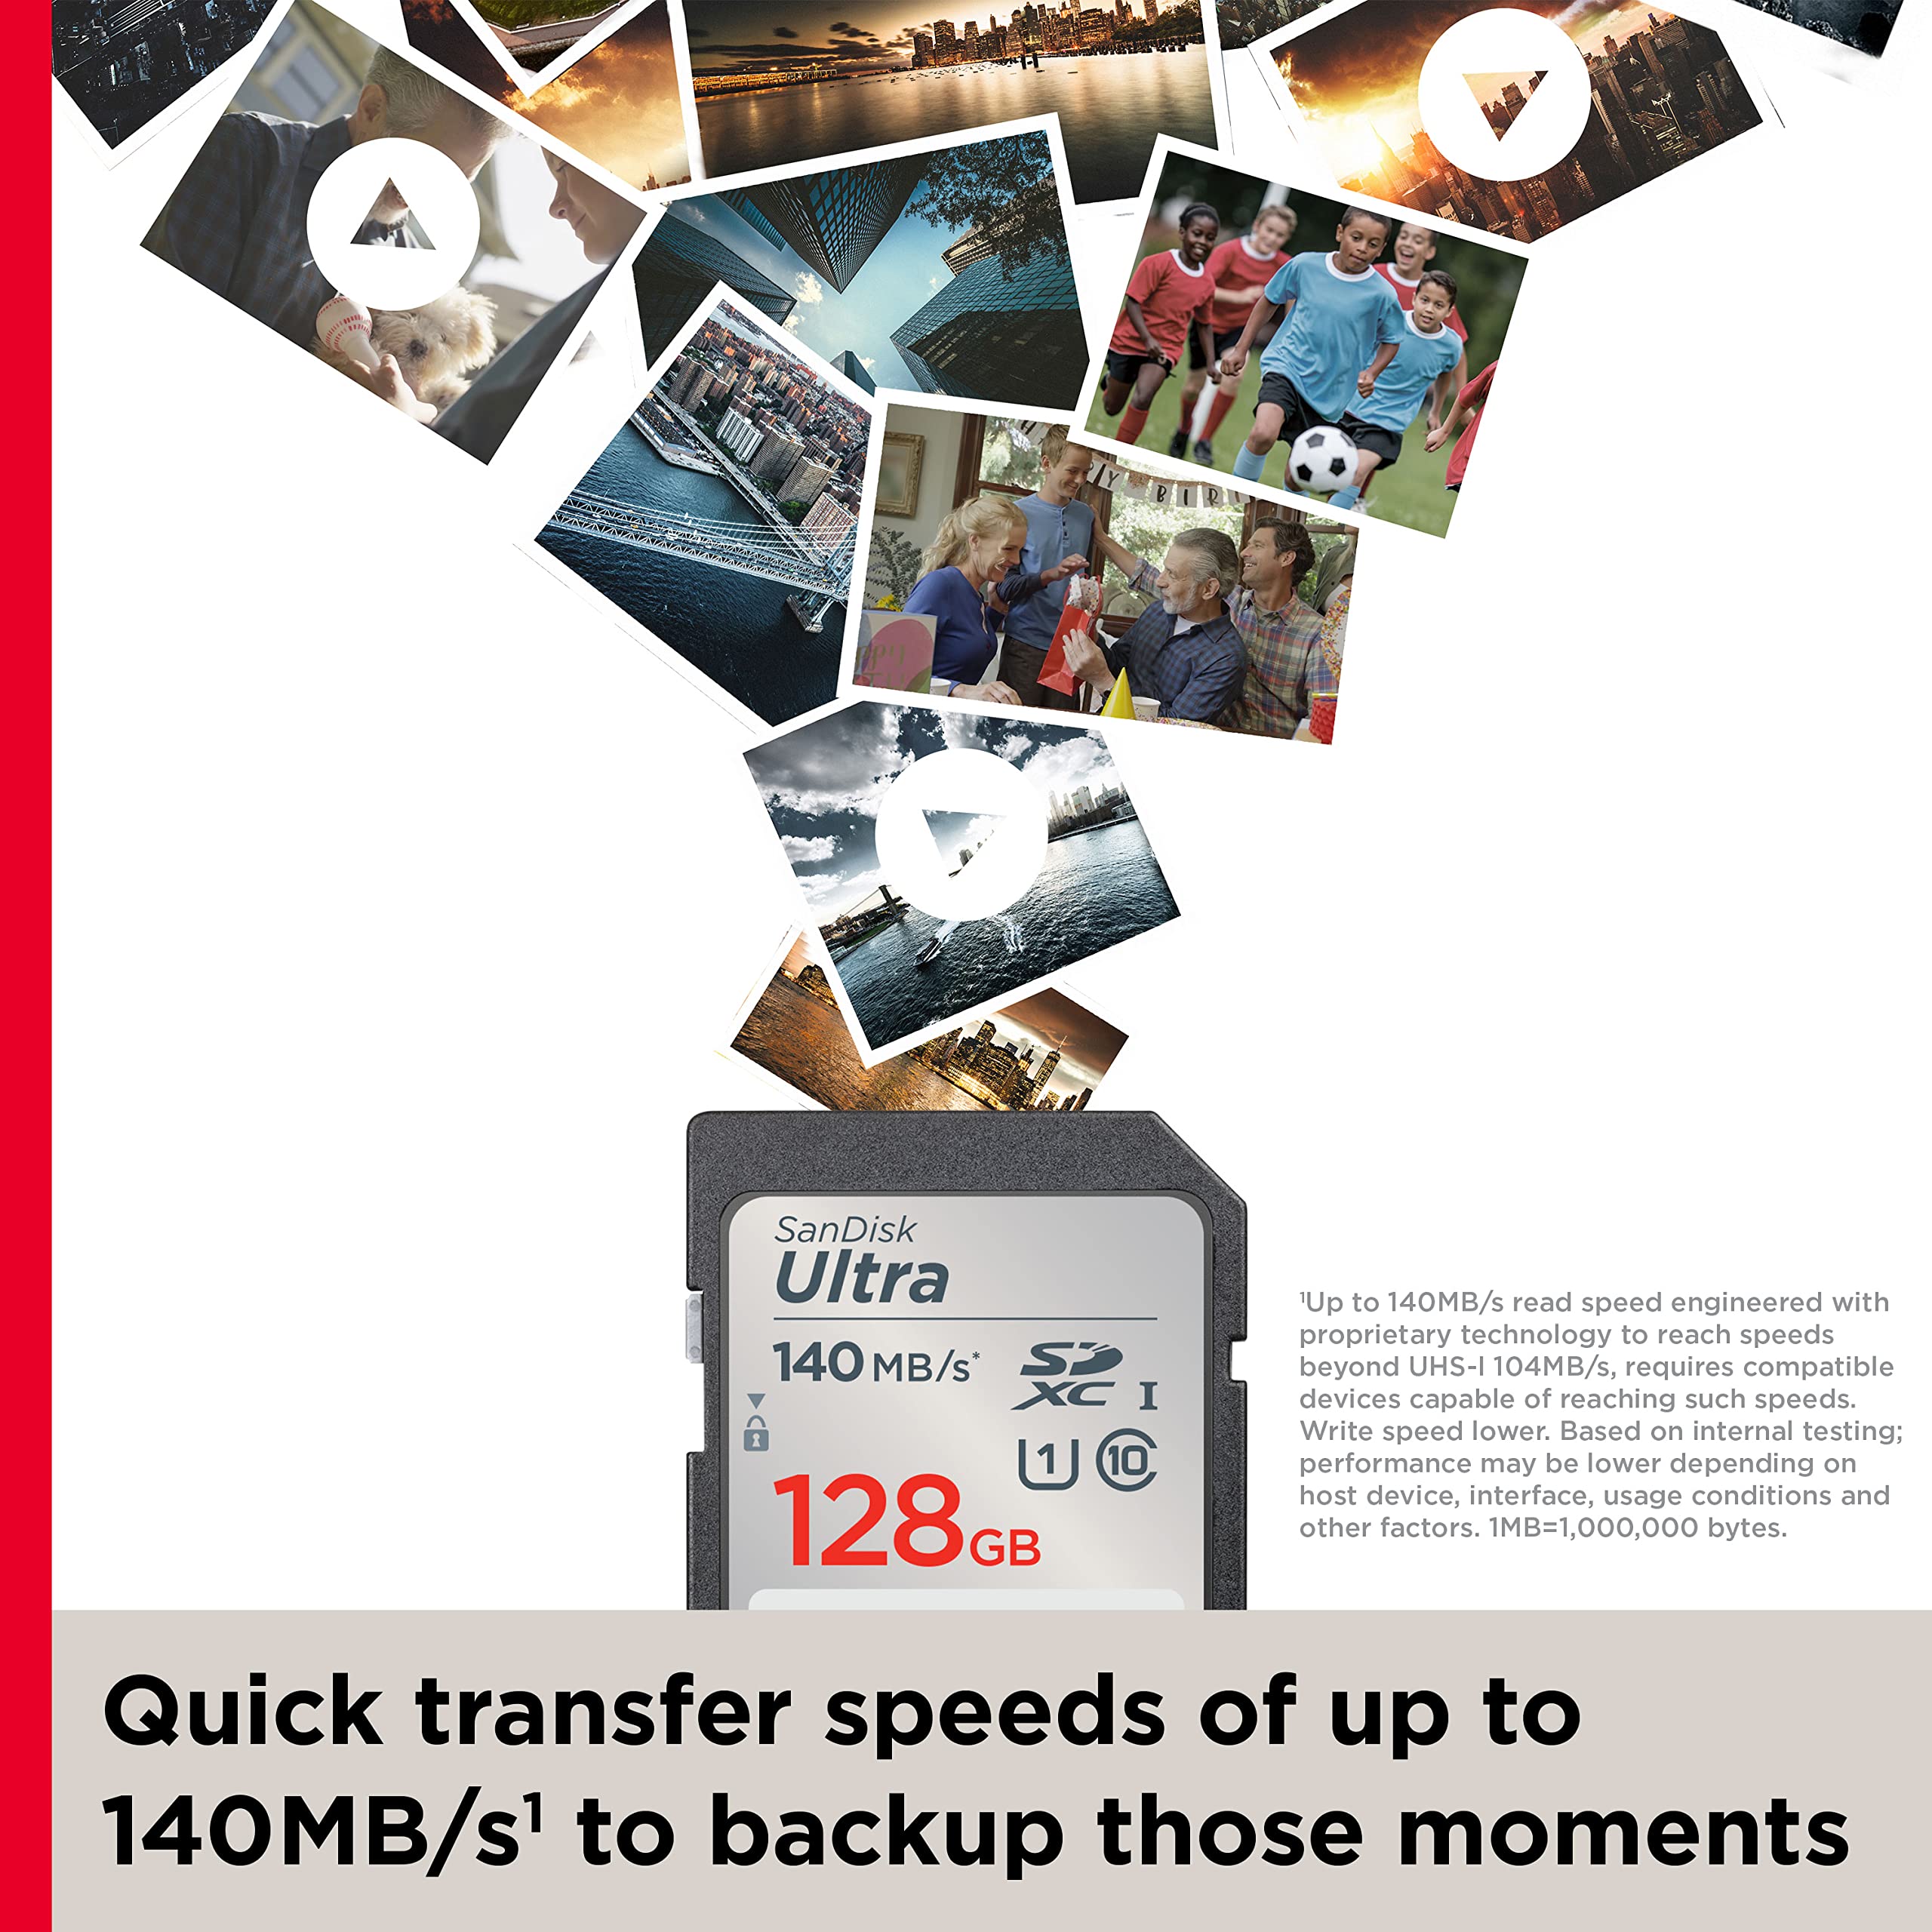 SanDisk 128GB Ultra SDXC UHS-I Memory Card - Up to 140MB/s, C10, U1, Full HD, SD Card - SDSDUNB-128G-GN6IN